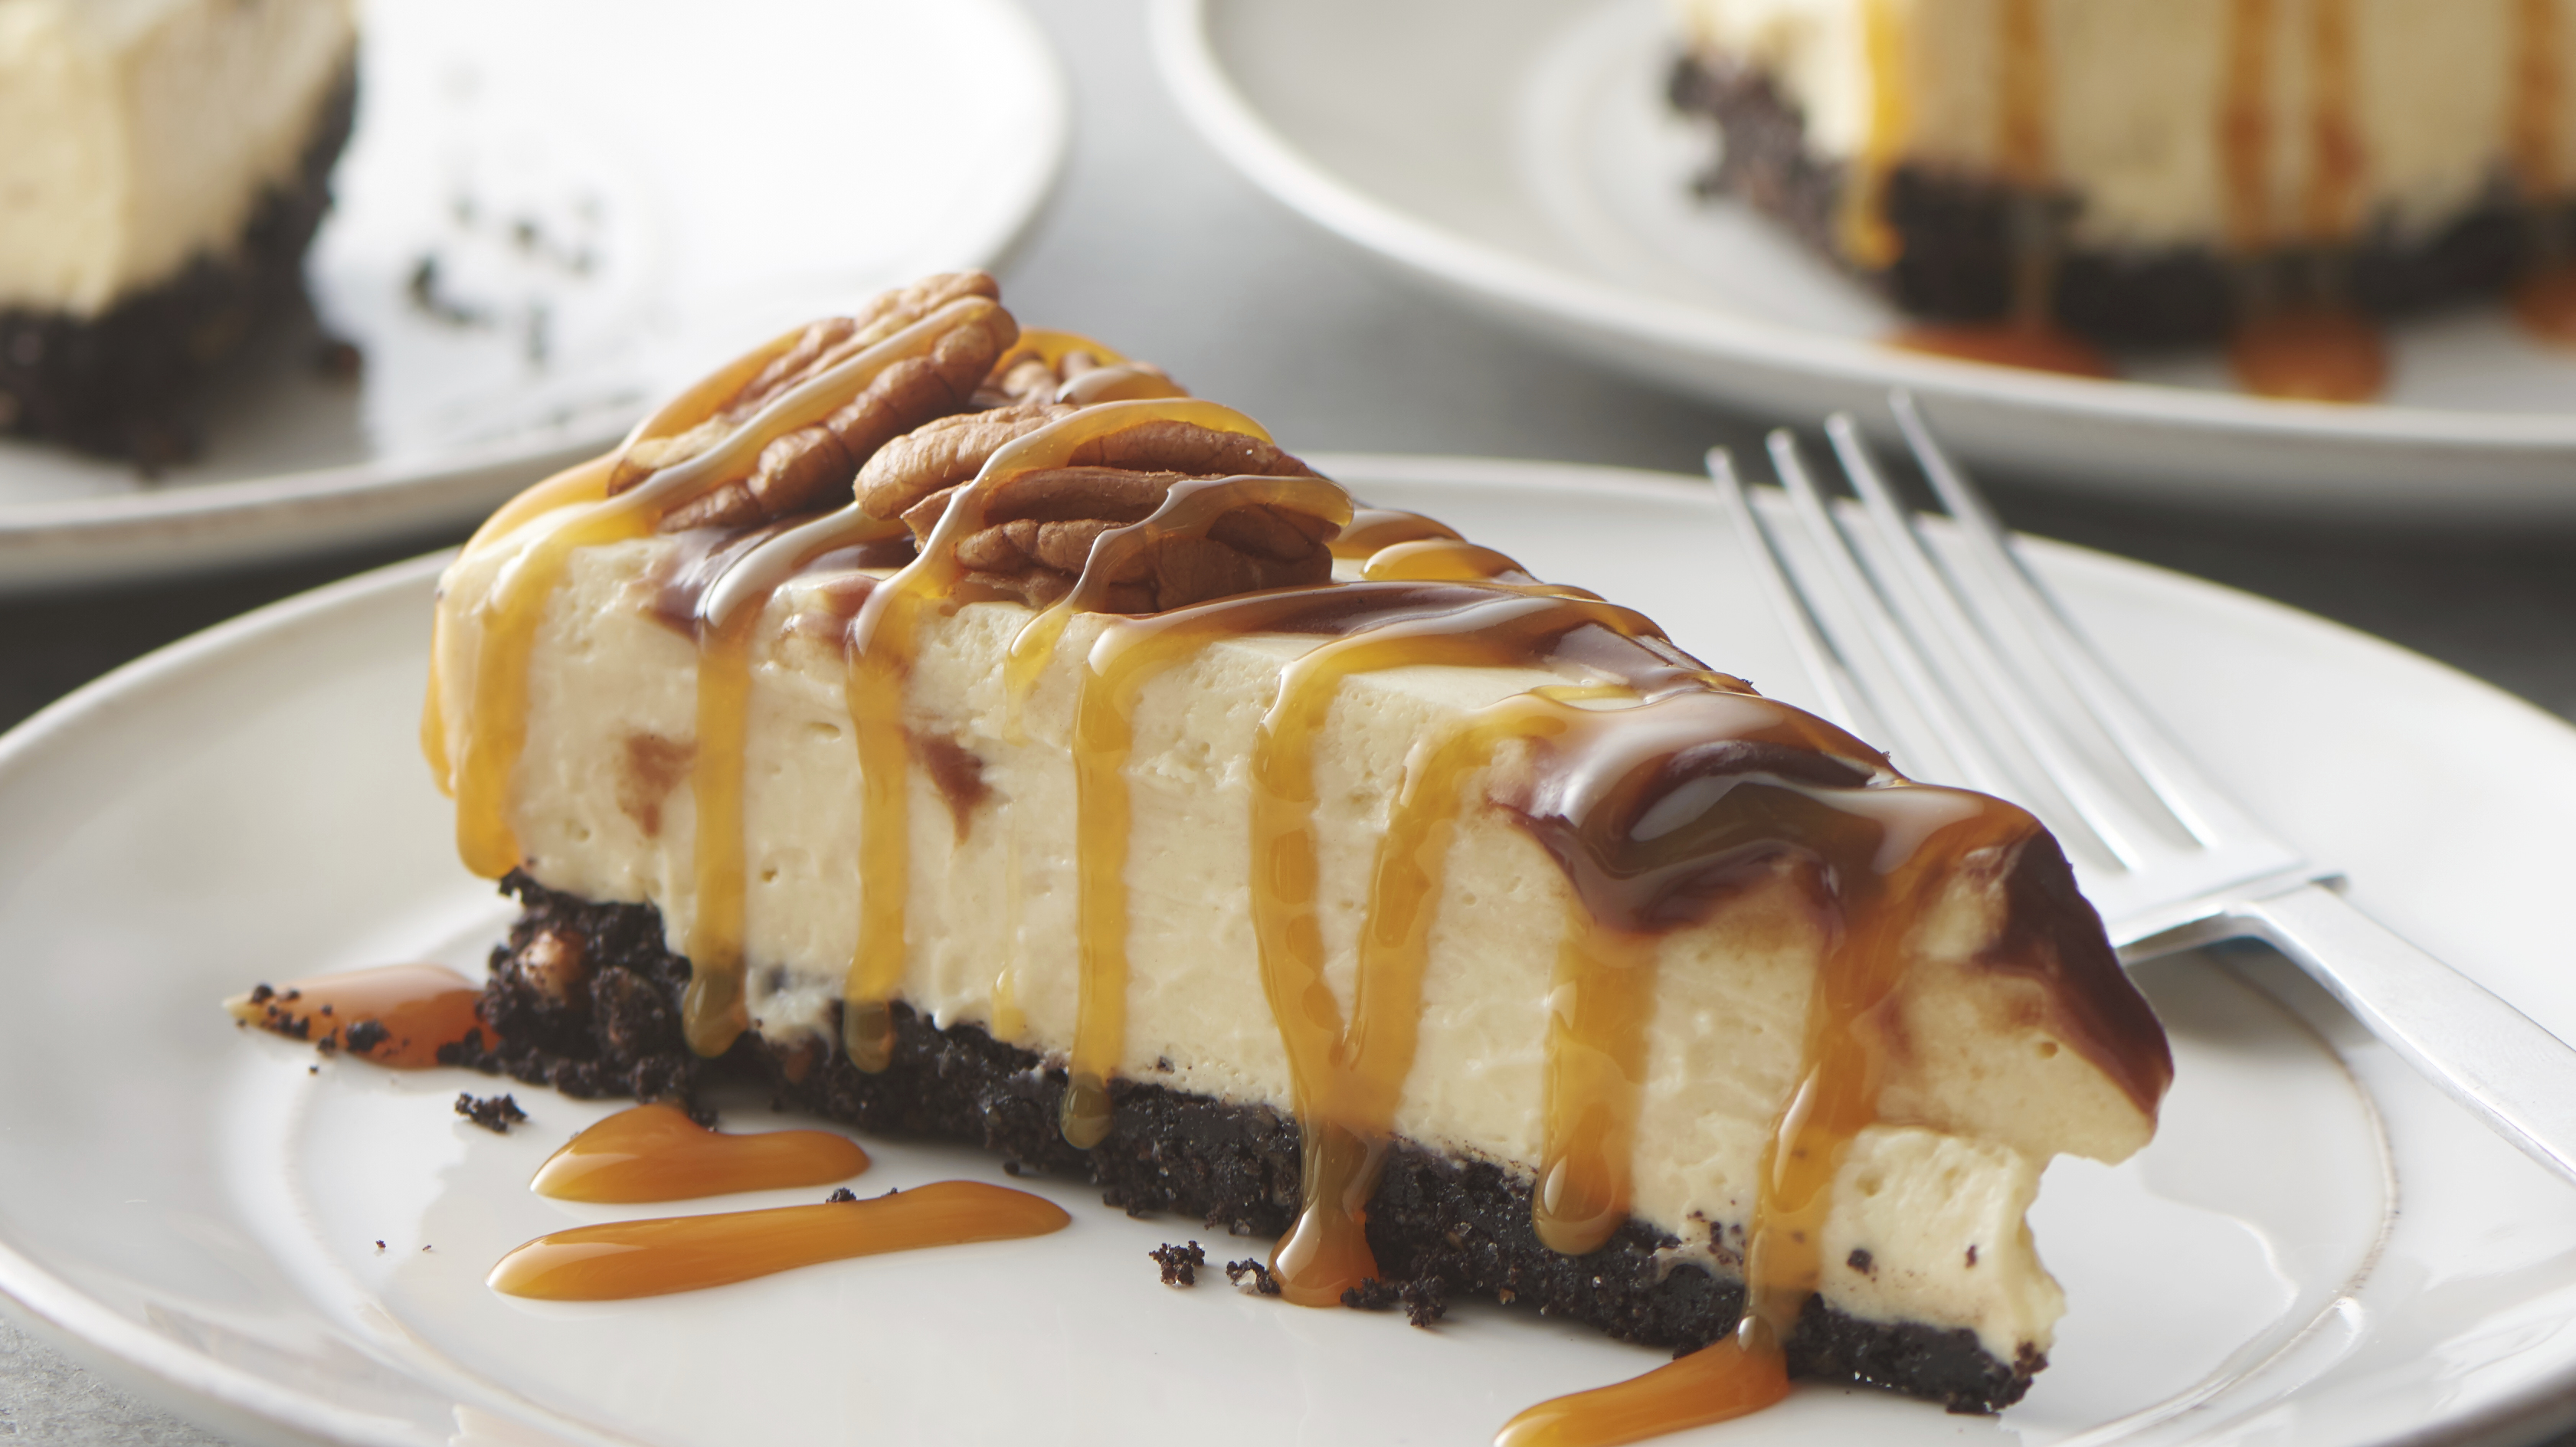 No Bake Reese's Peanut Butter Cheesecake | Life, Love and Sugar